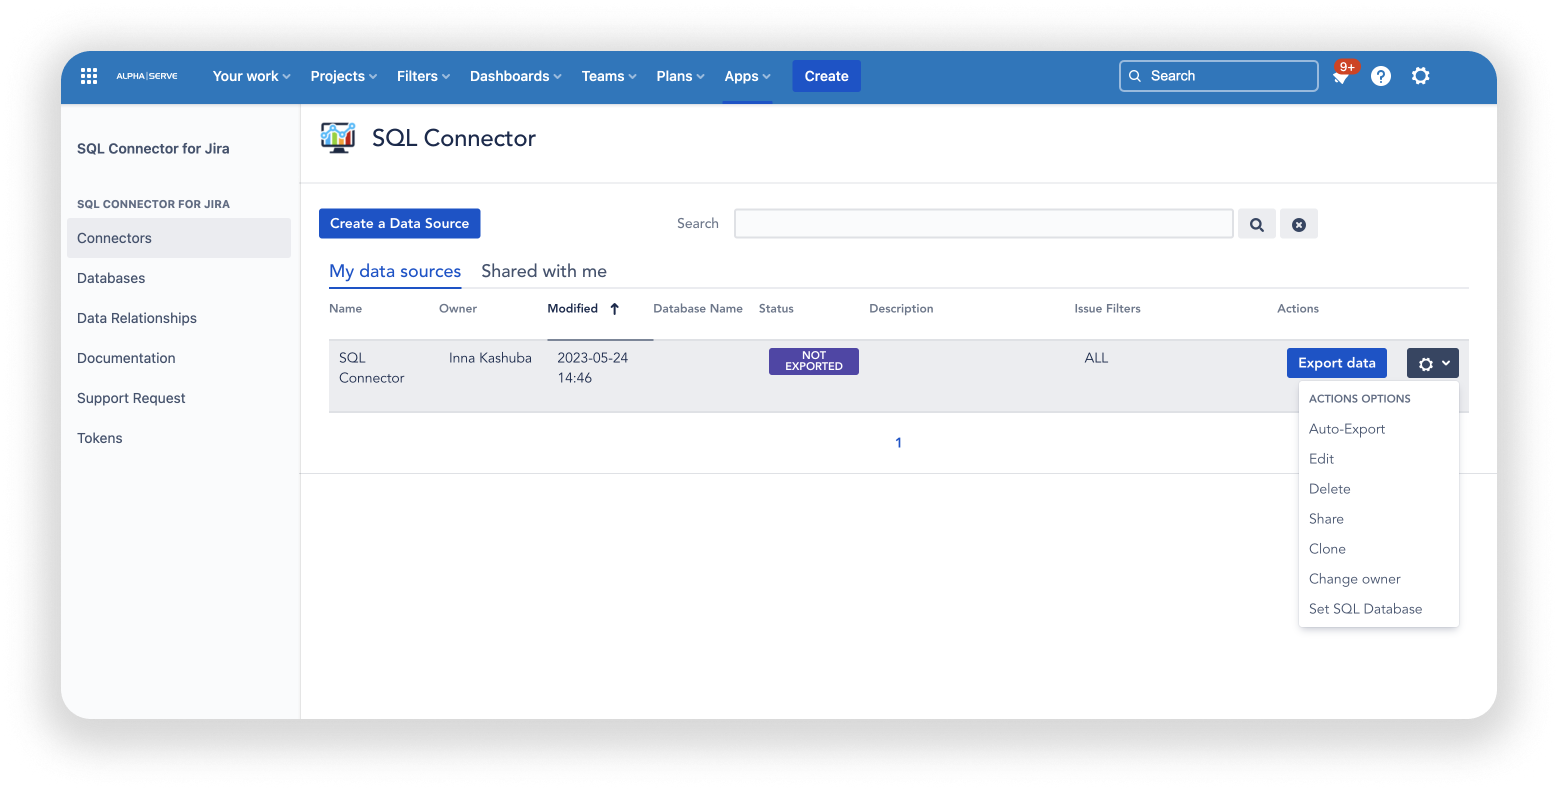 SQL Connector for Jira Software - SQL Connector for Jira: Export Data Using Advanced Features